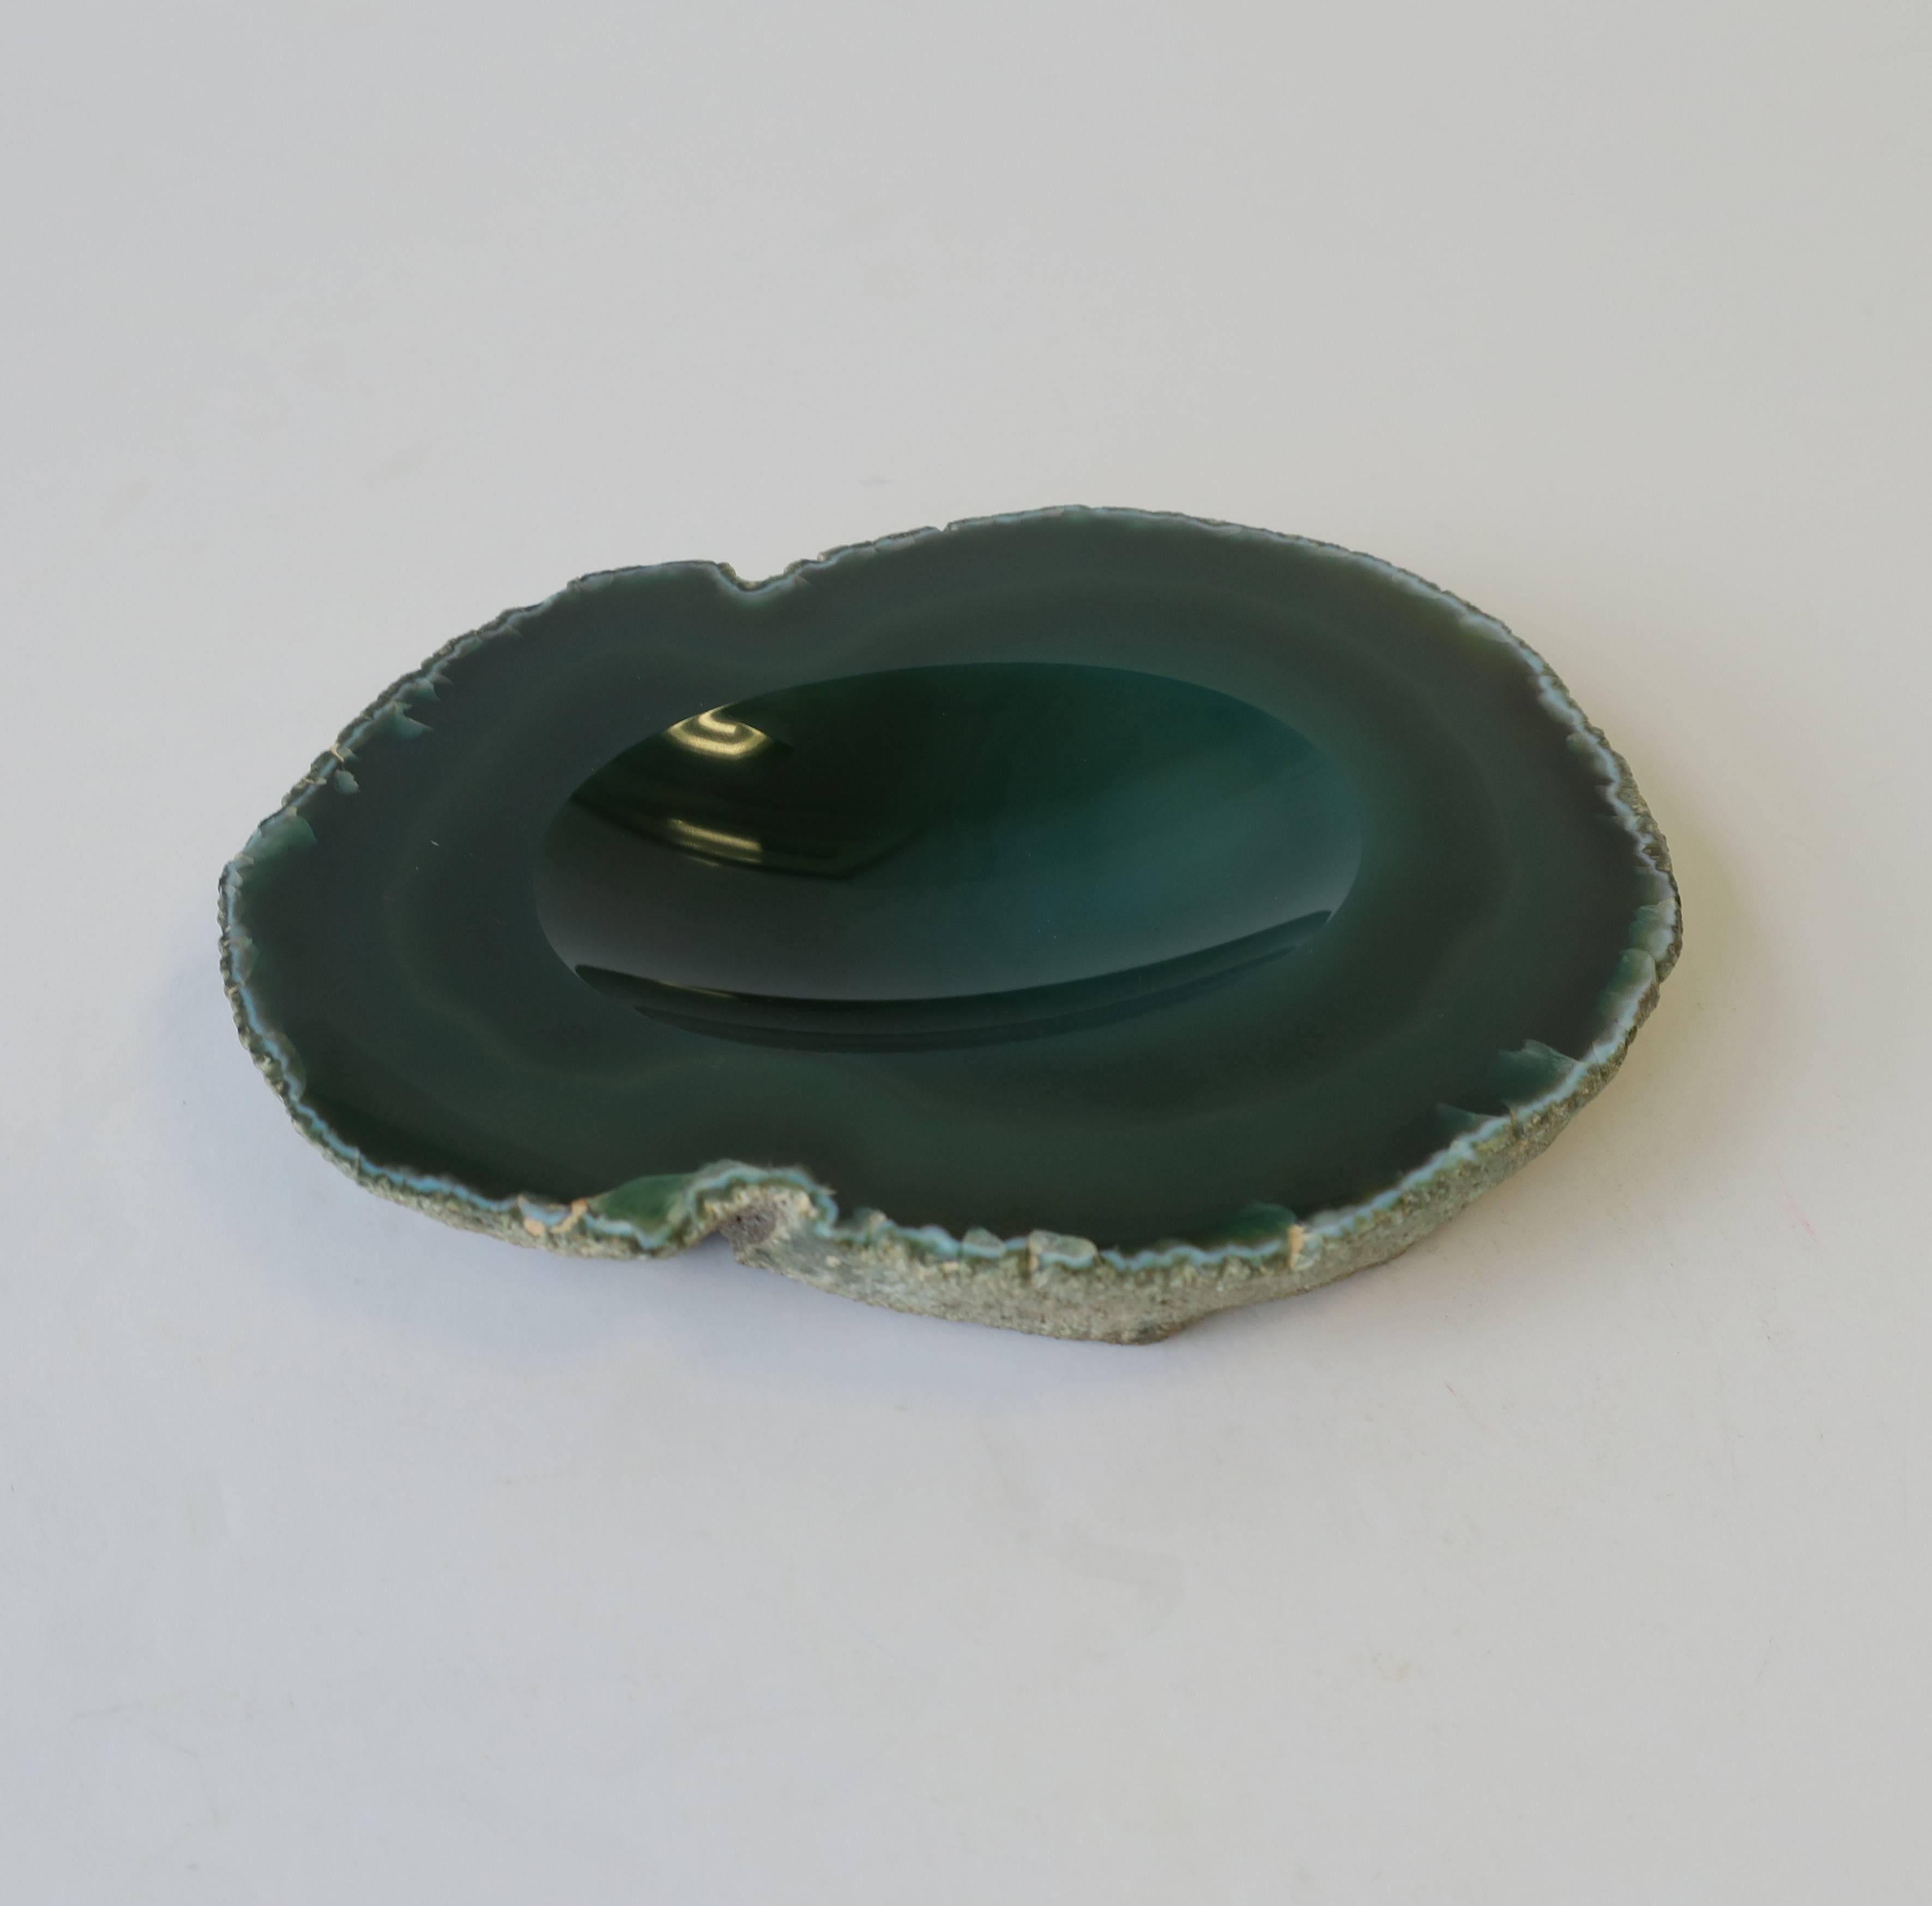 20th Century Vintage Emerald Green Agate Geode Vessel Bowl or Decorative Object